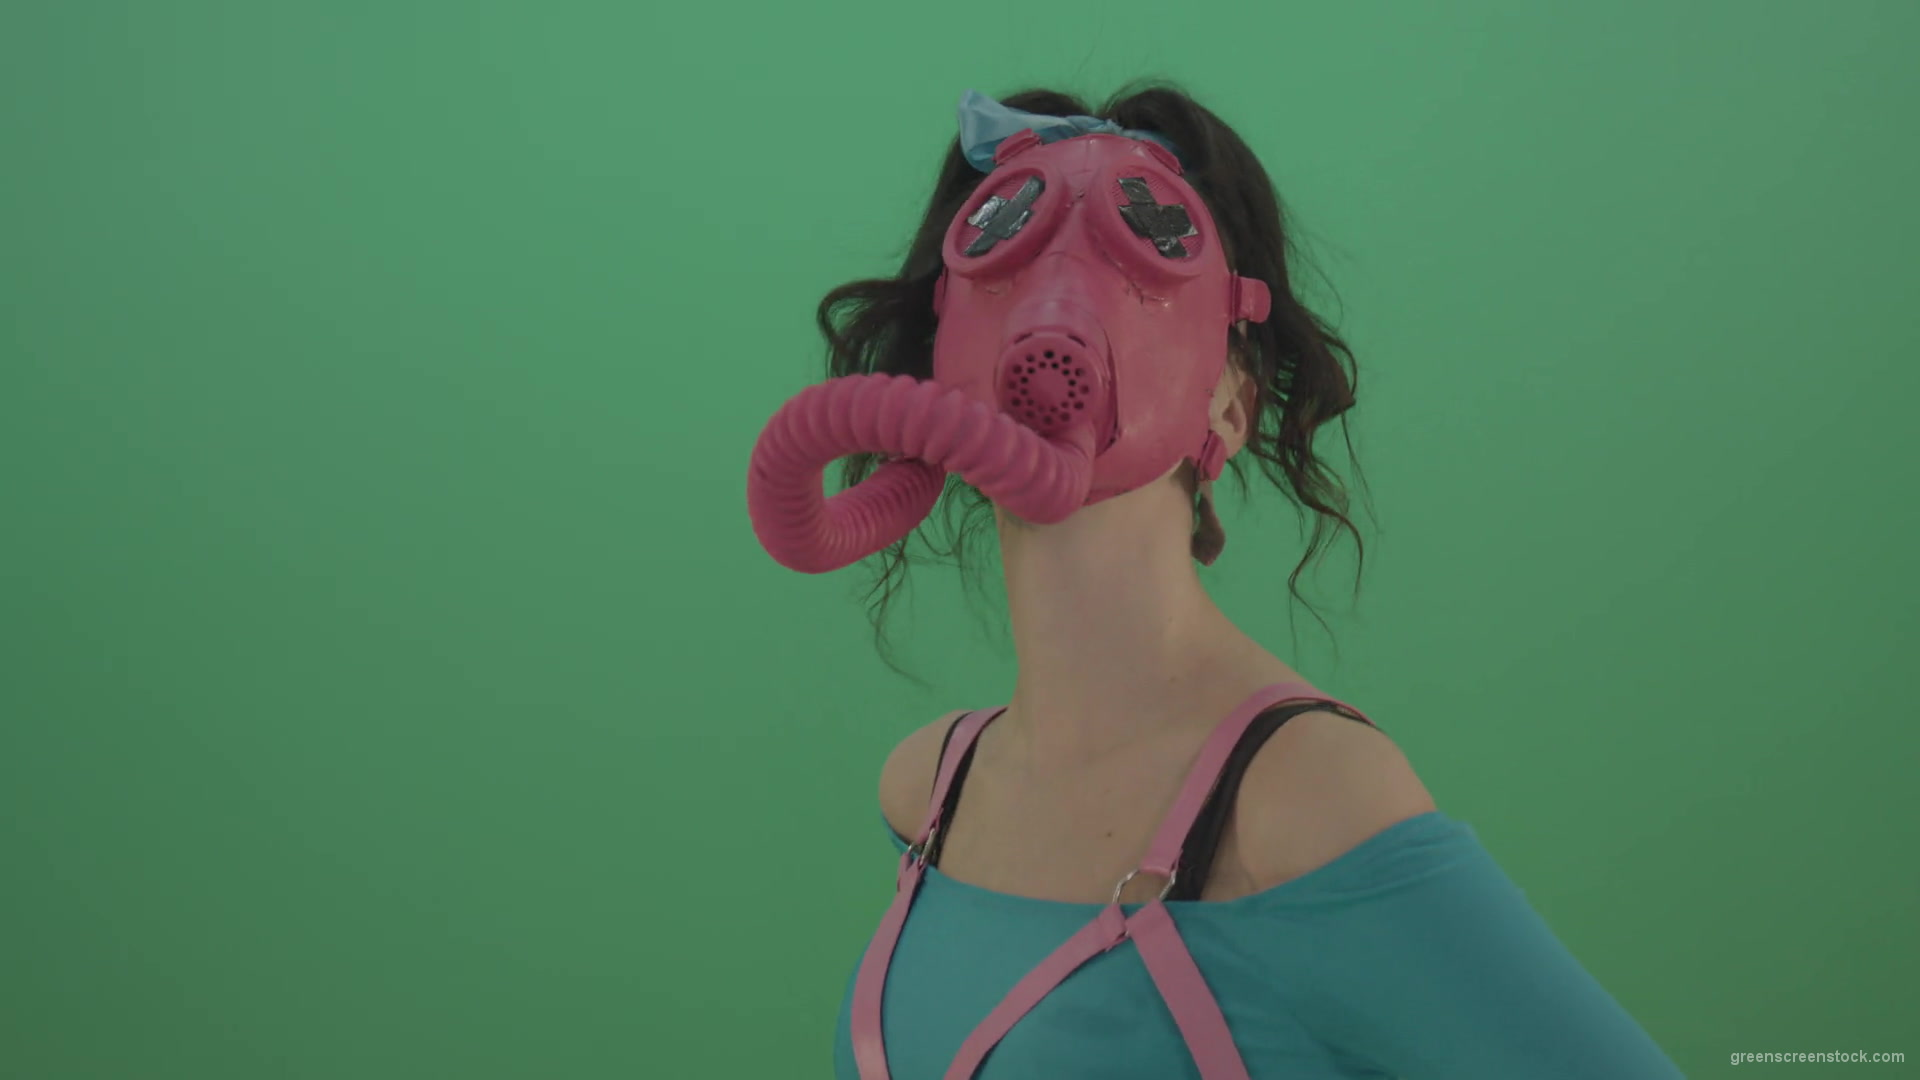 Pink-head-in-Gas-Mask-moving-Go-Go-Dance-isolated-on-green-screen-4K-Video-Footage-1920_005 Green Screen Stock